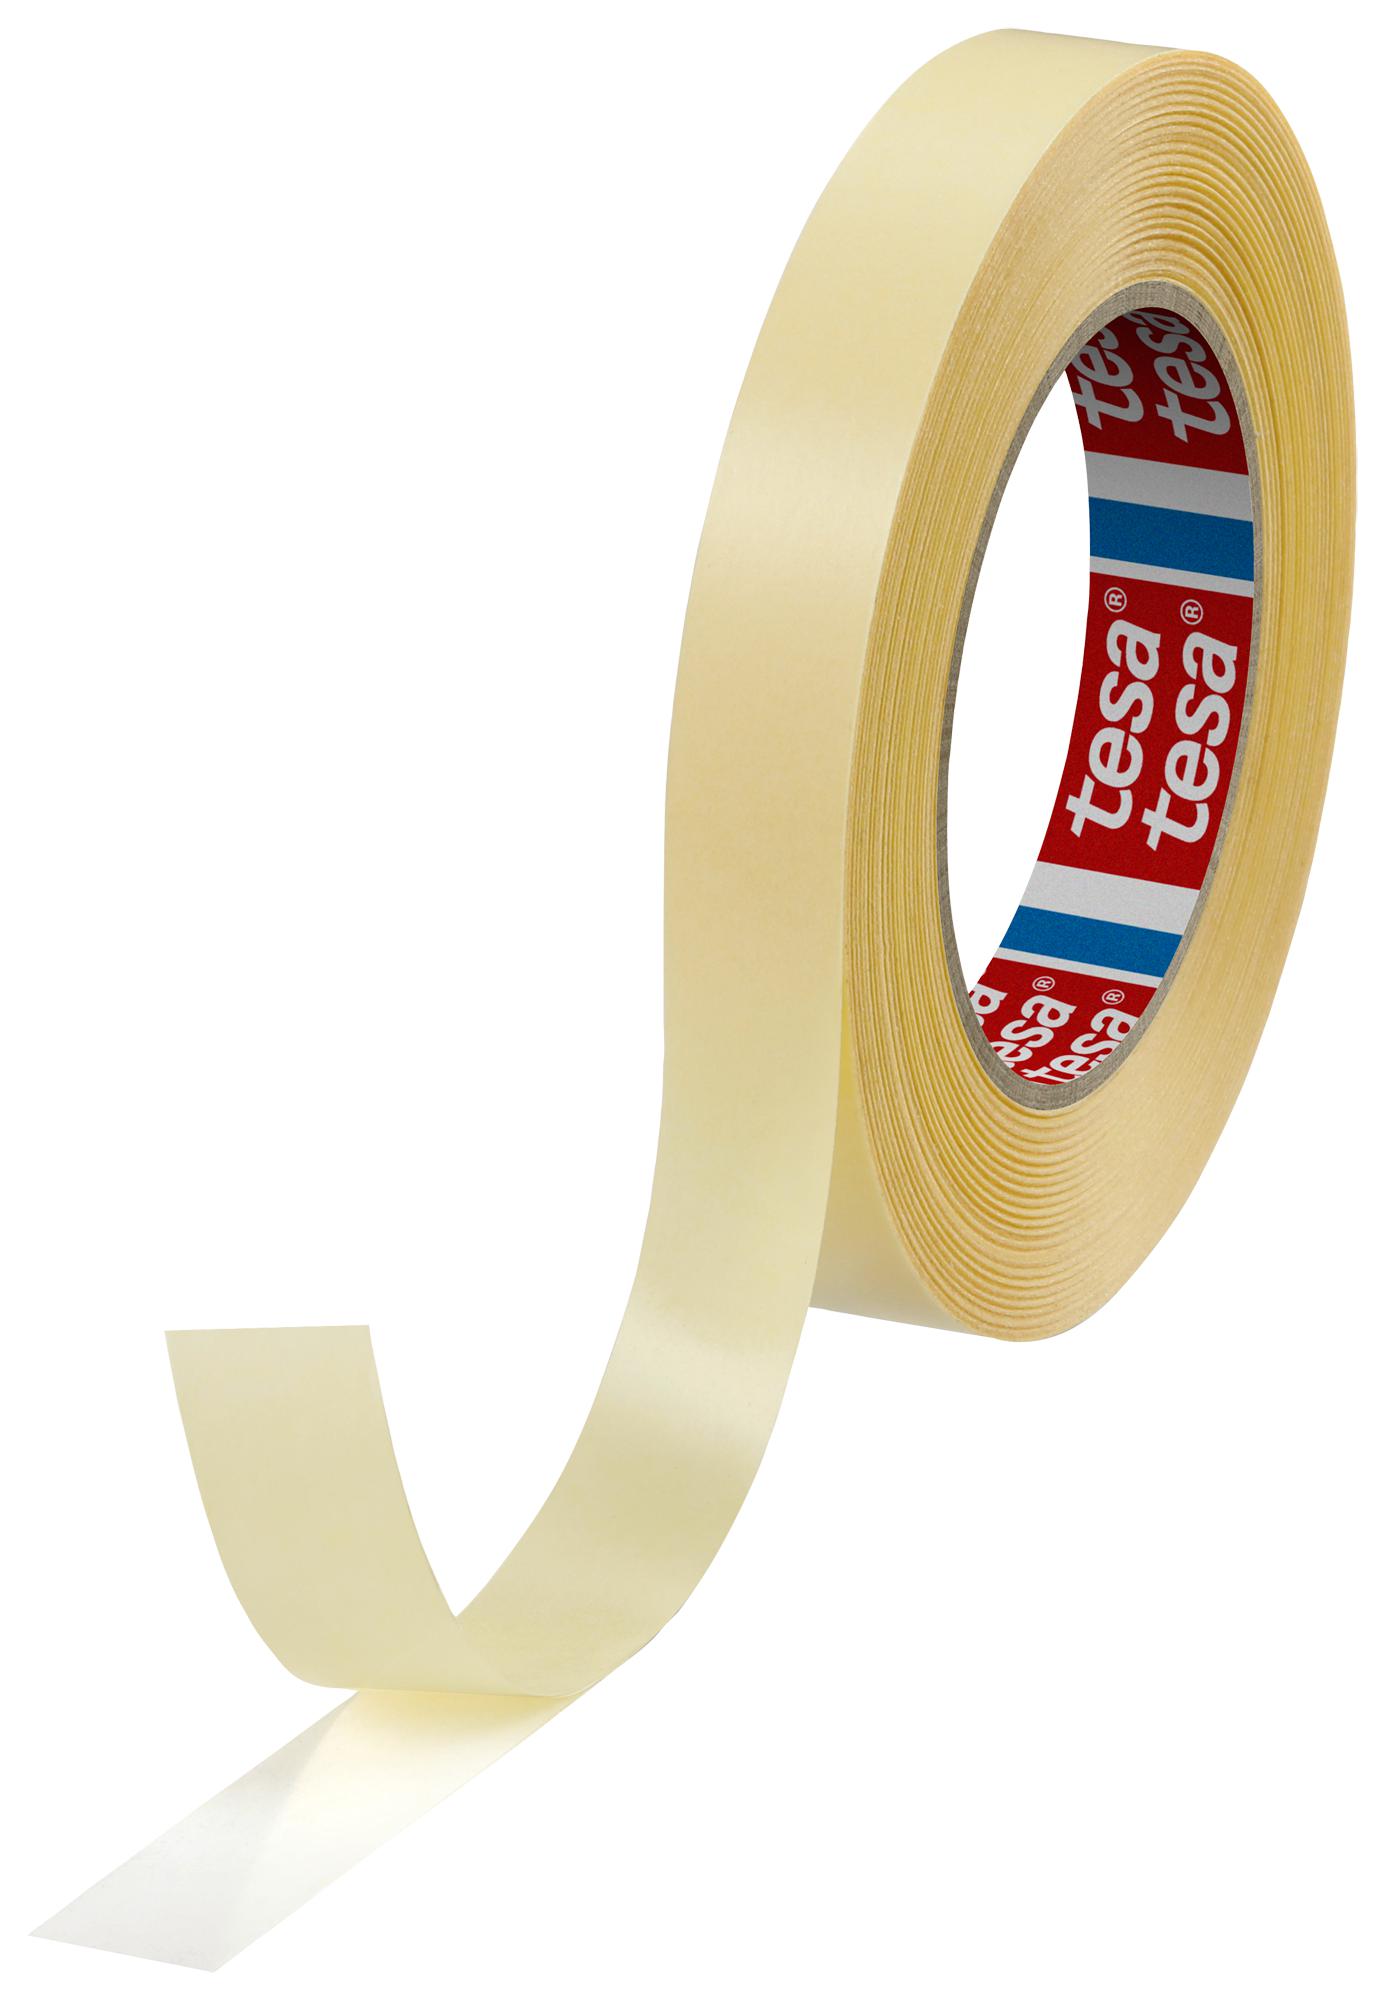 Tesa 64621-00003-00 Double Sided Tape, Pp, 50M X 19mm